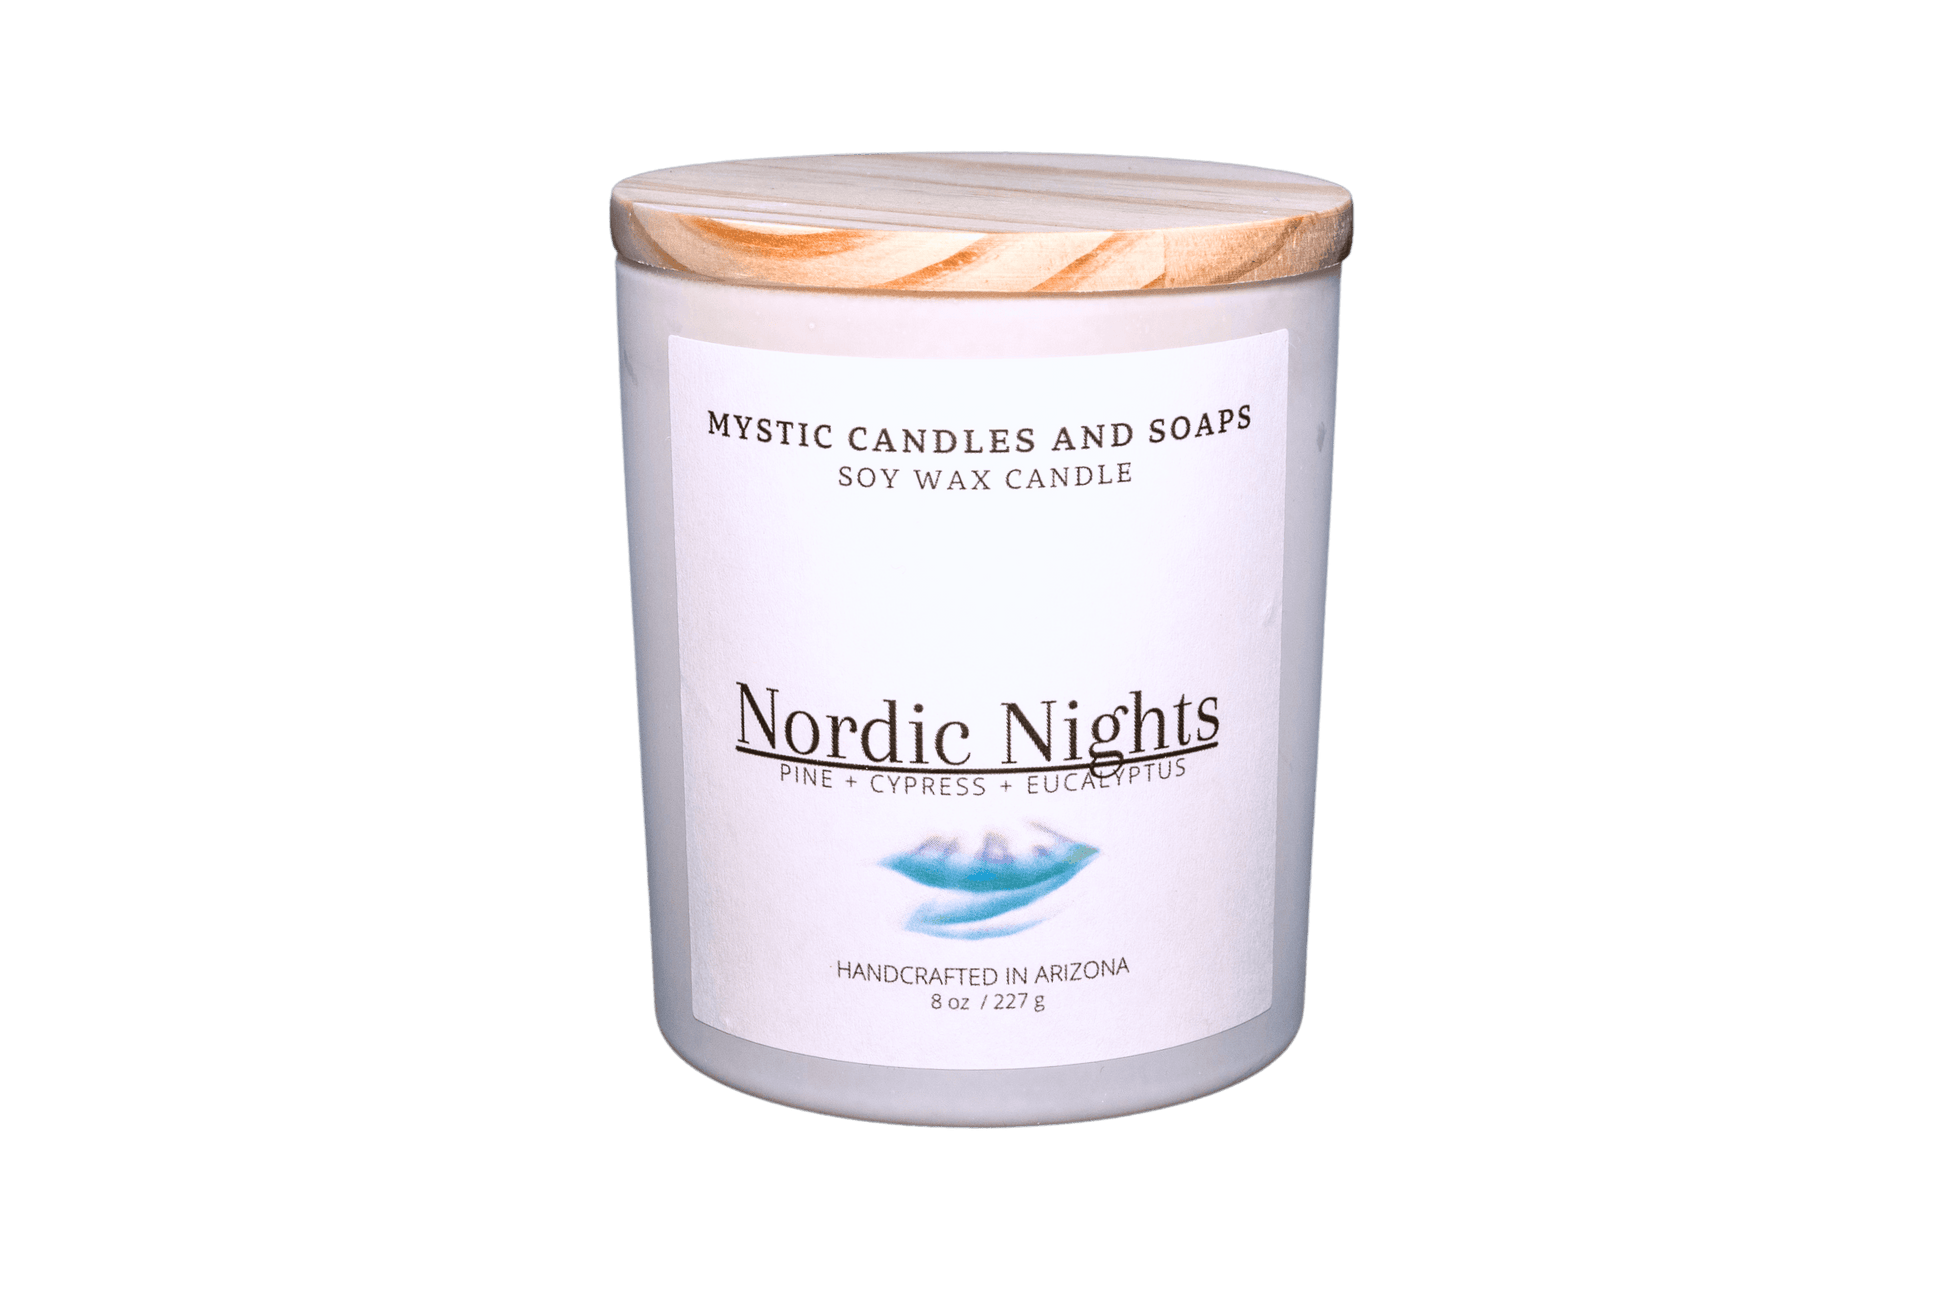 Nordic Nights Candle - Mystic Candles